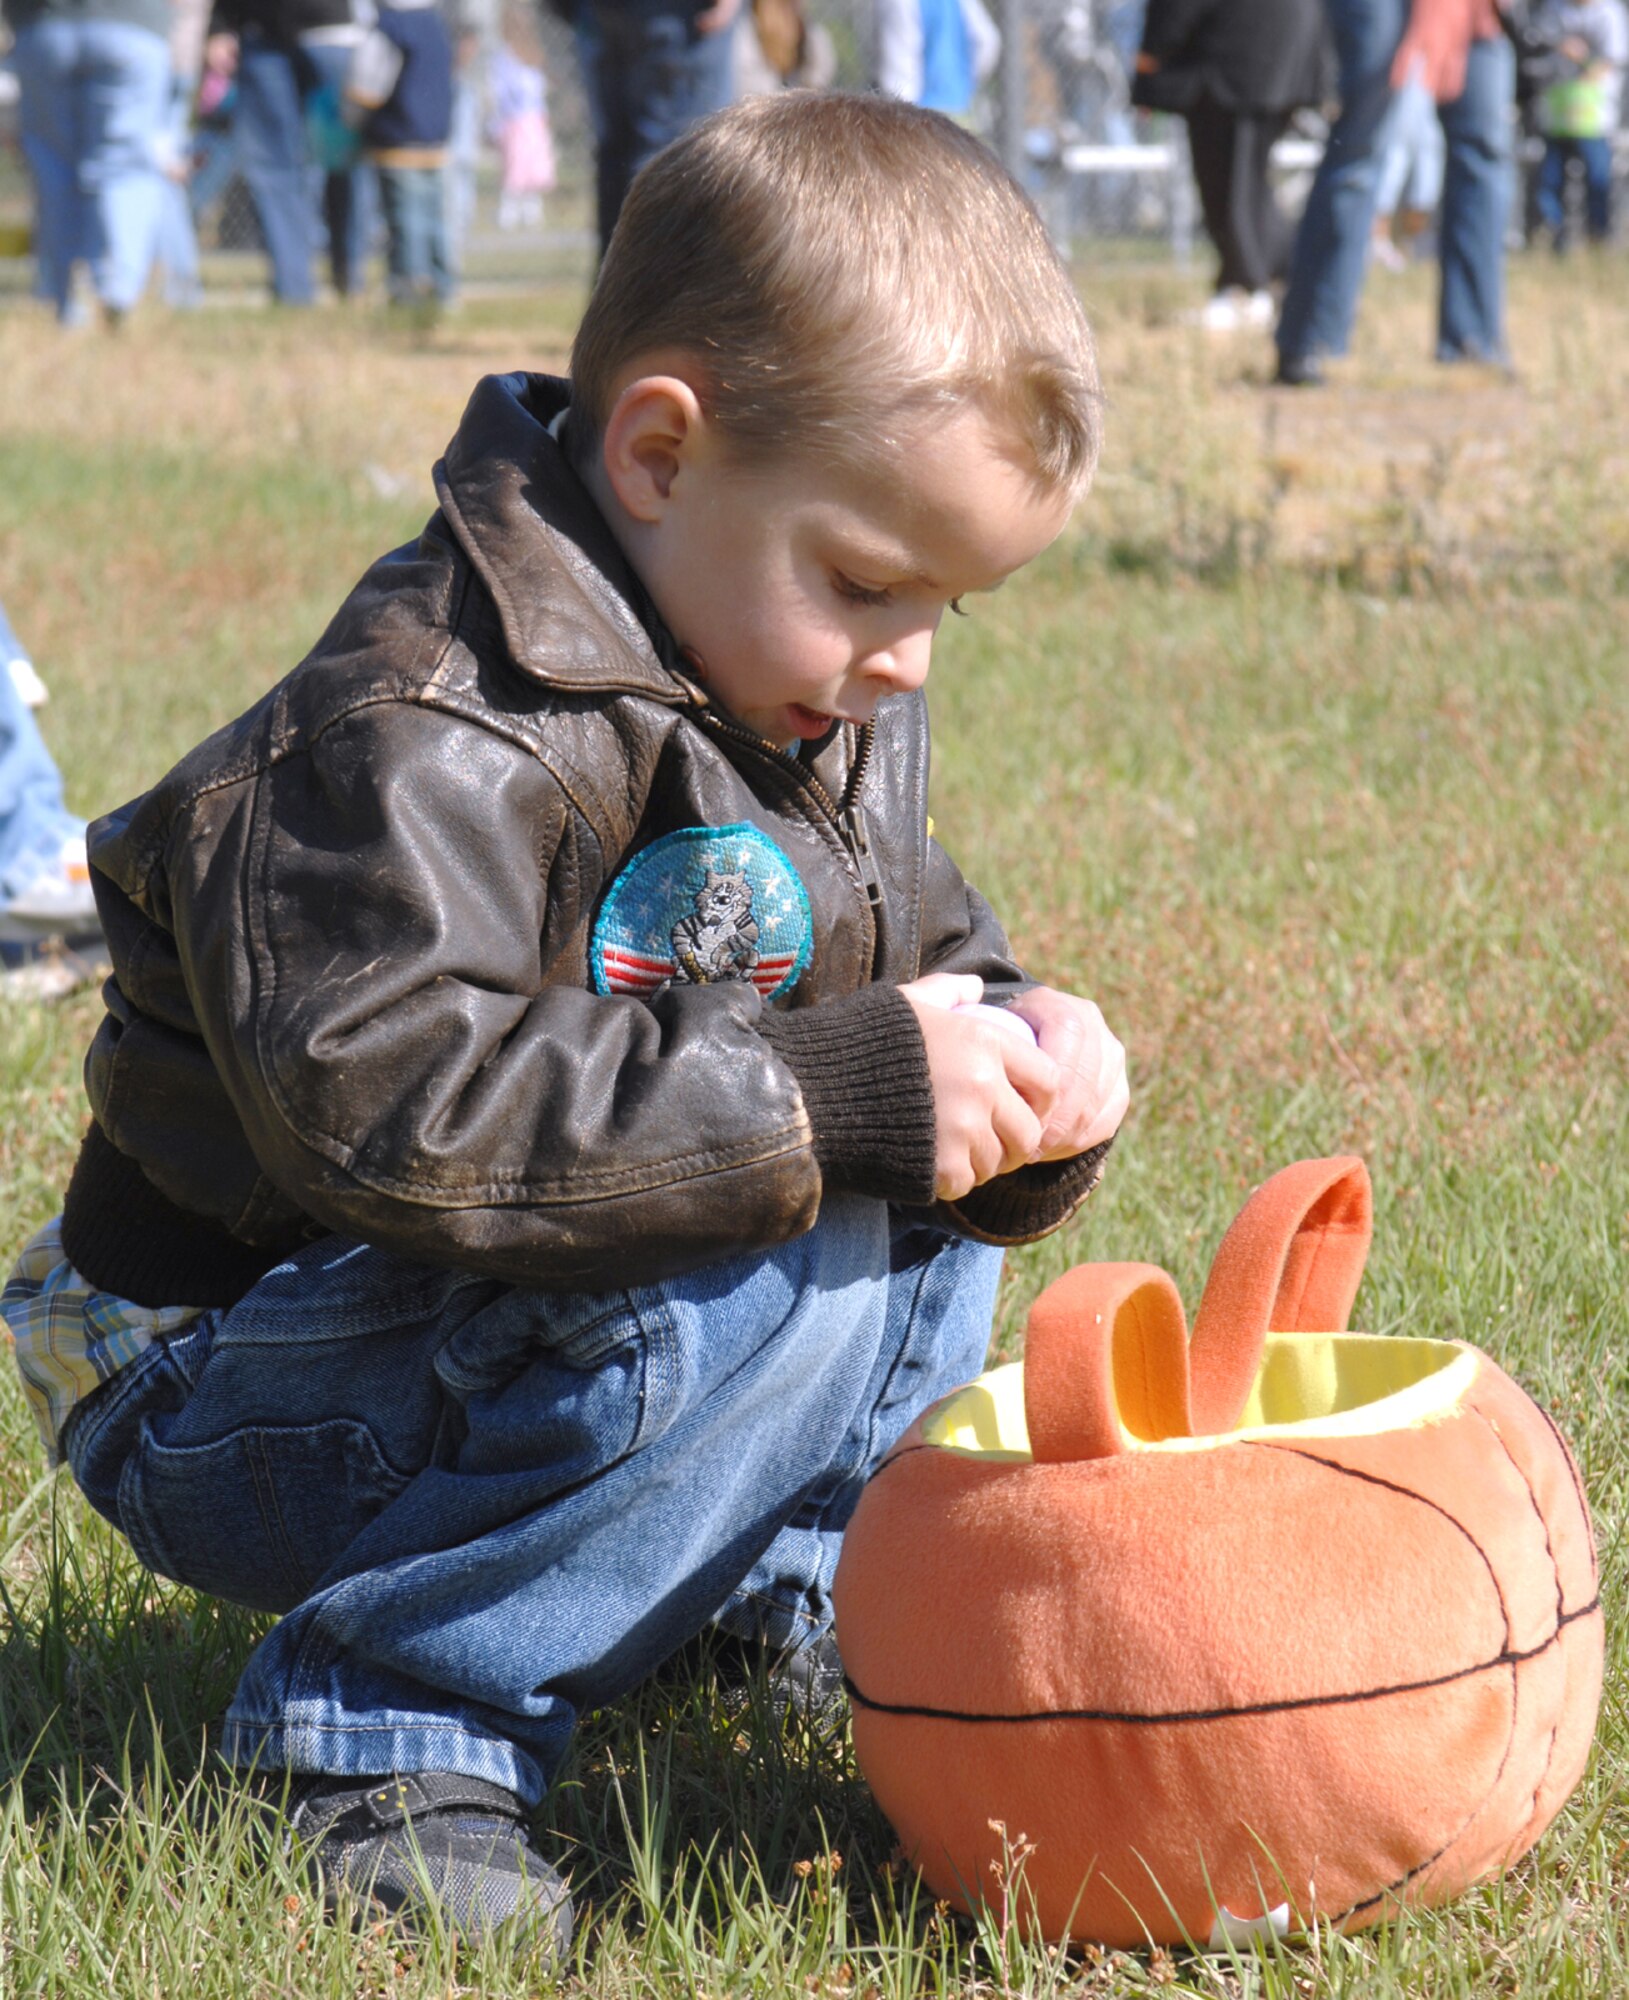 Colsen Boortz, son of Capt. Daniel Boortz, inspects the contents of an Easter egg during Moody's Easter Egg Hunt April 7. The event, which is held annually, was open for all Team Moody children between the ages of 3 months to 12 years. (U.S. Air Force photo by Staff Sgt. Joshua Jasper)
